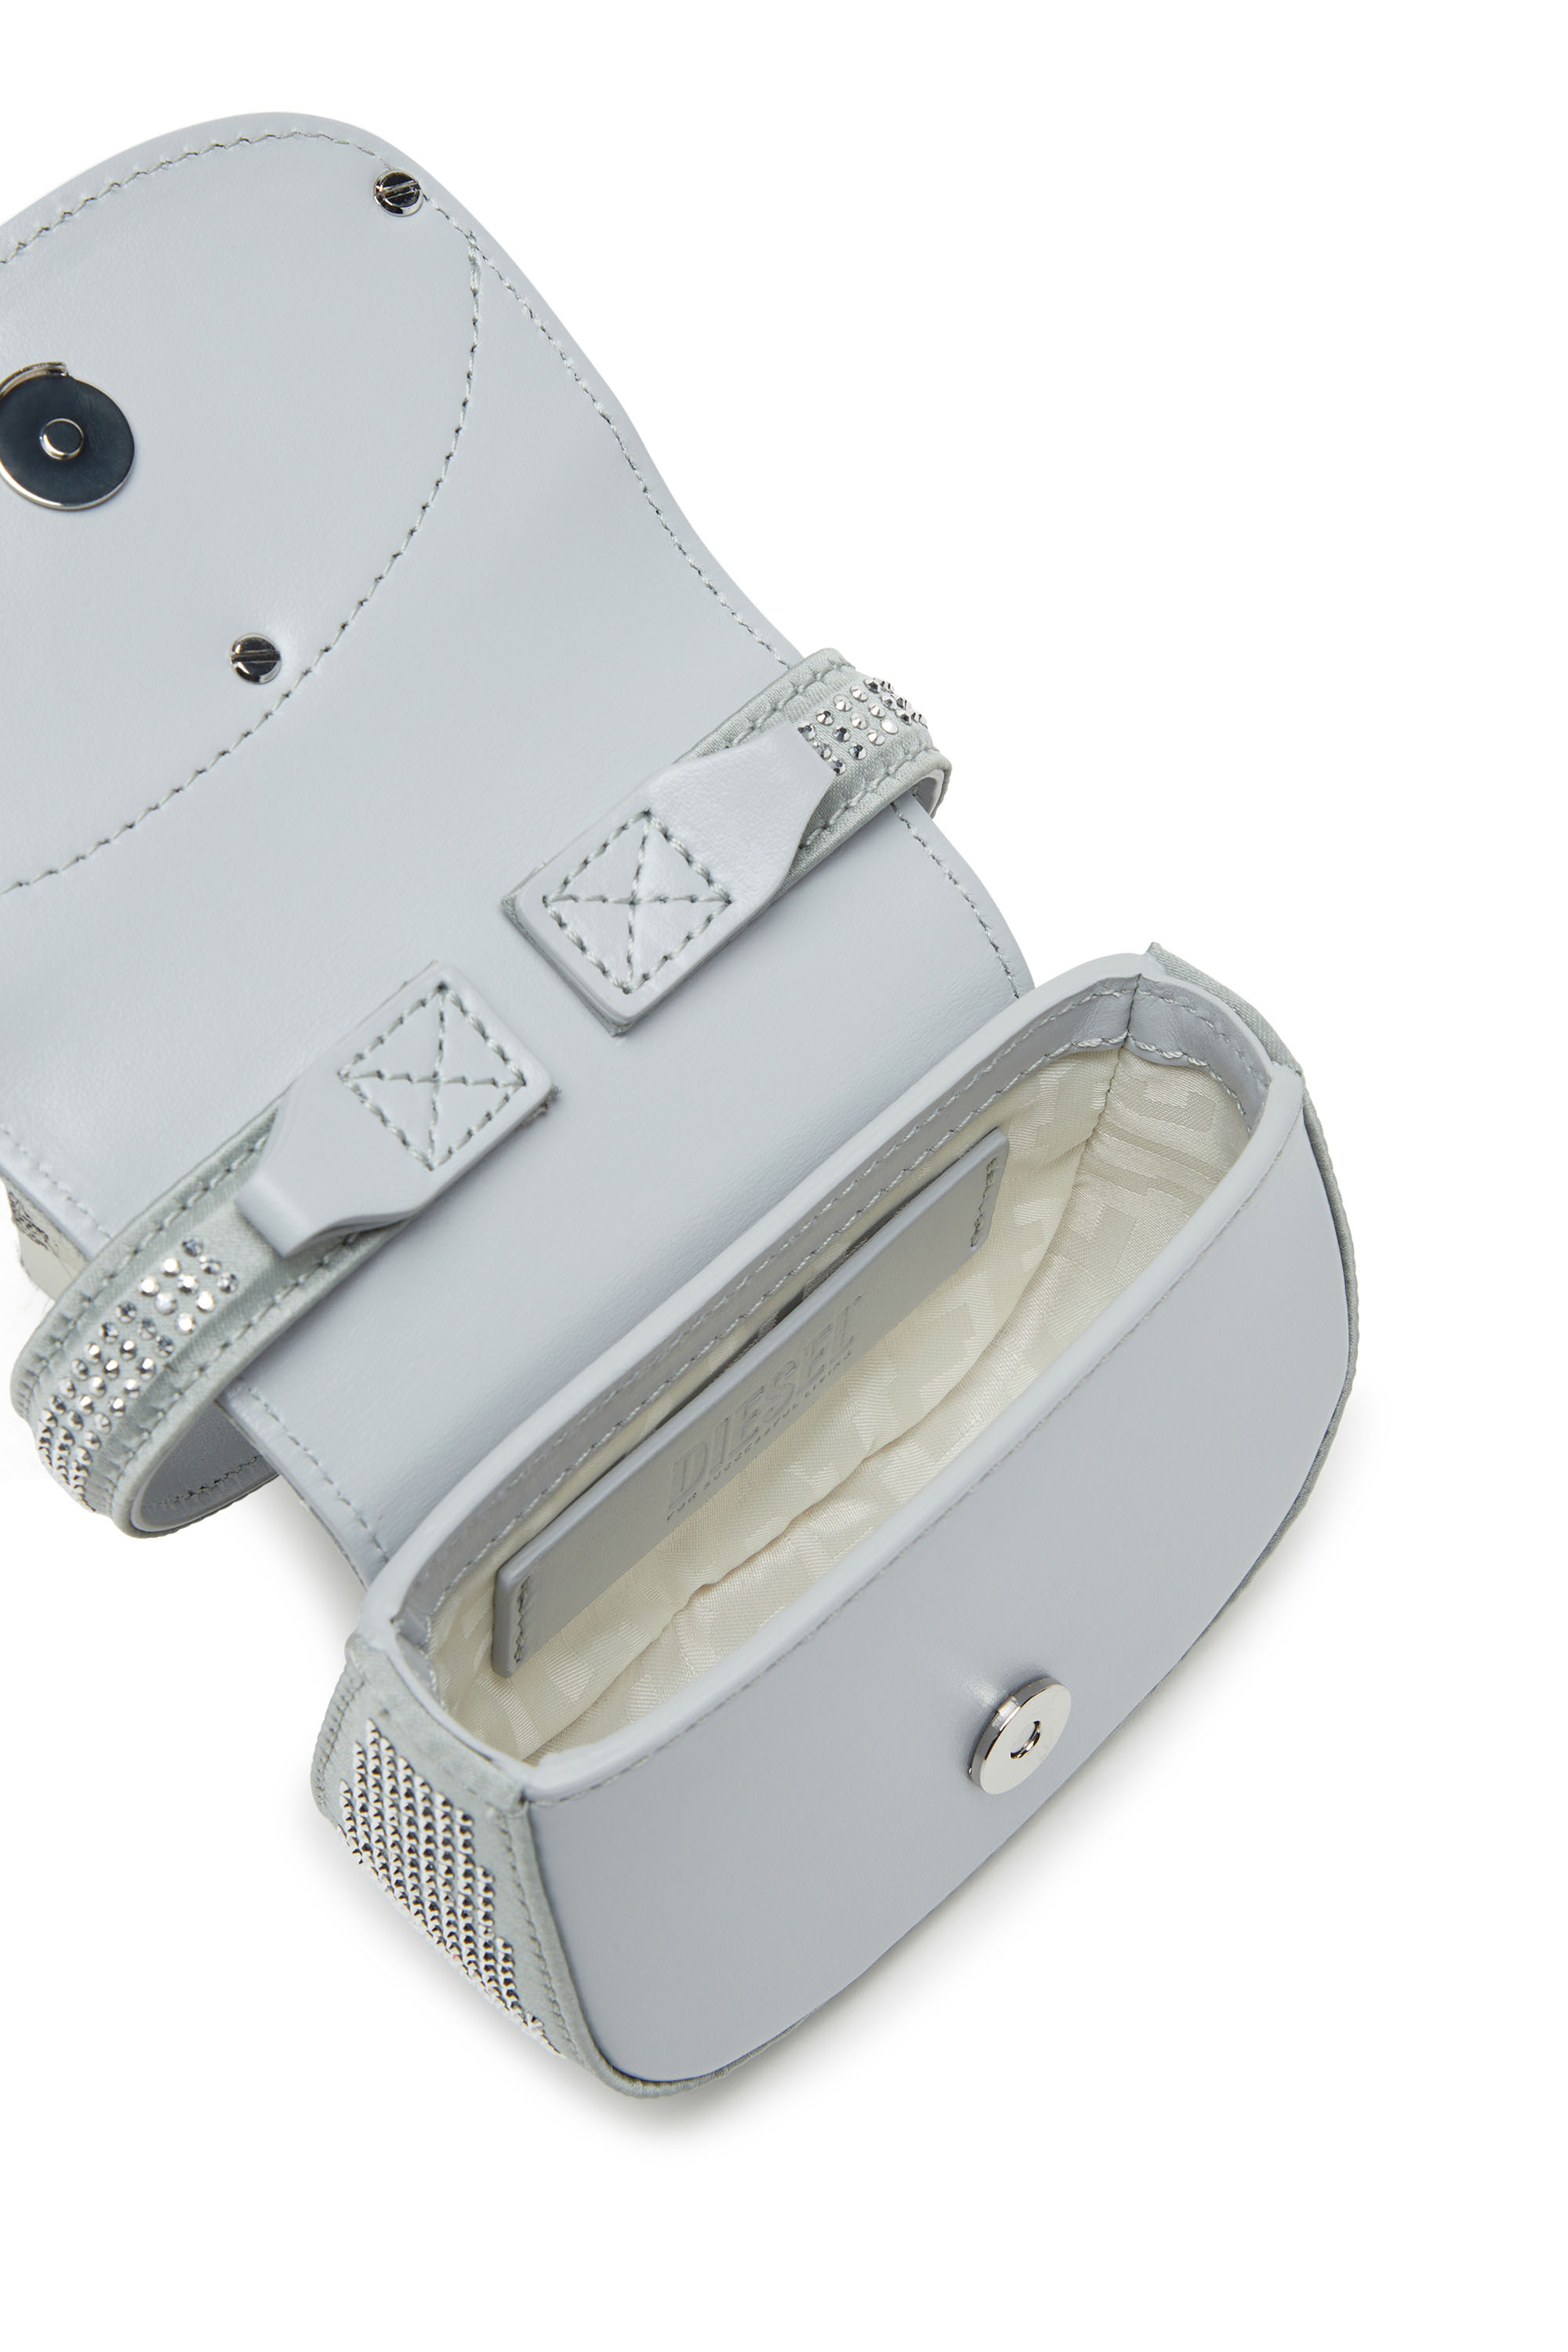 Diesel - 1DR XS, Woman 1DR XS Cross Bodybag - Iconic mini bag in crystal satin in Silver - Image 4